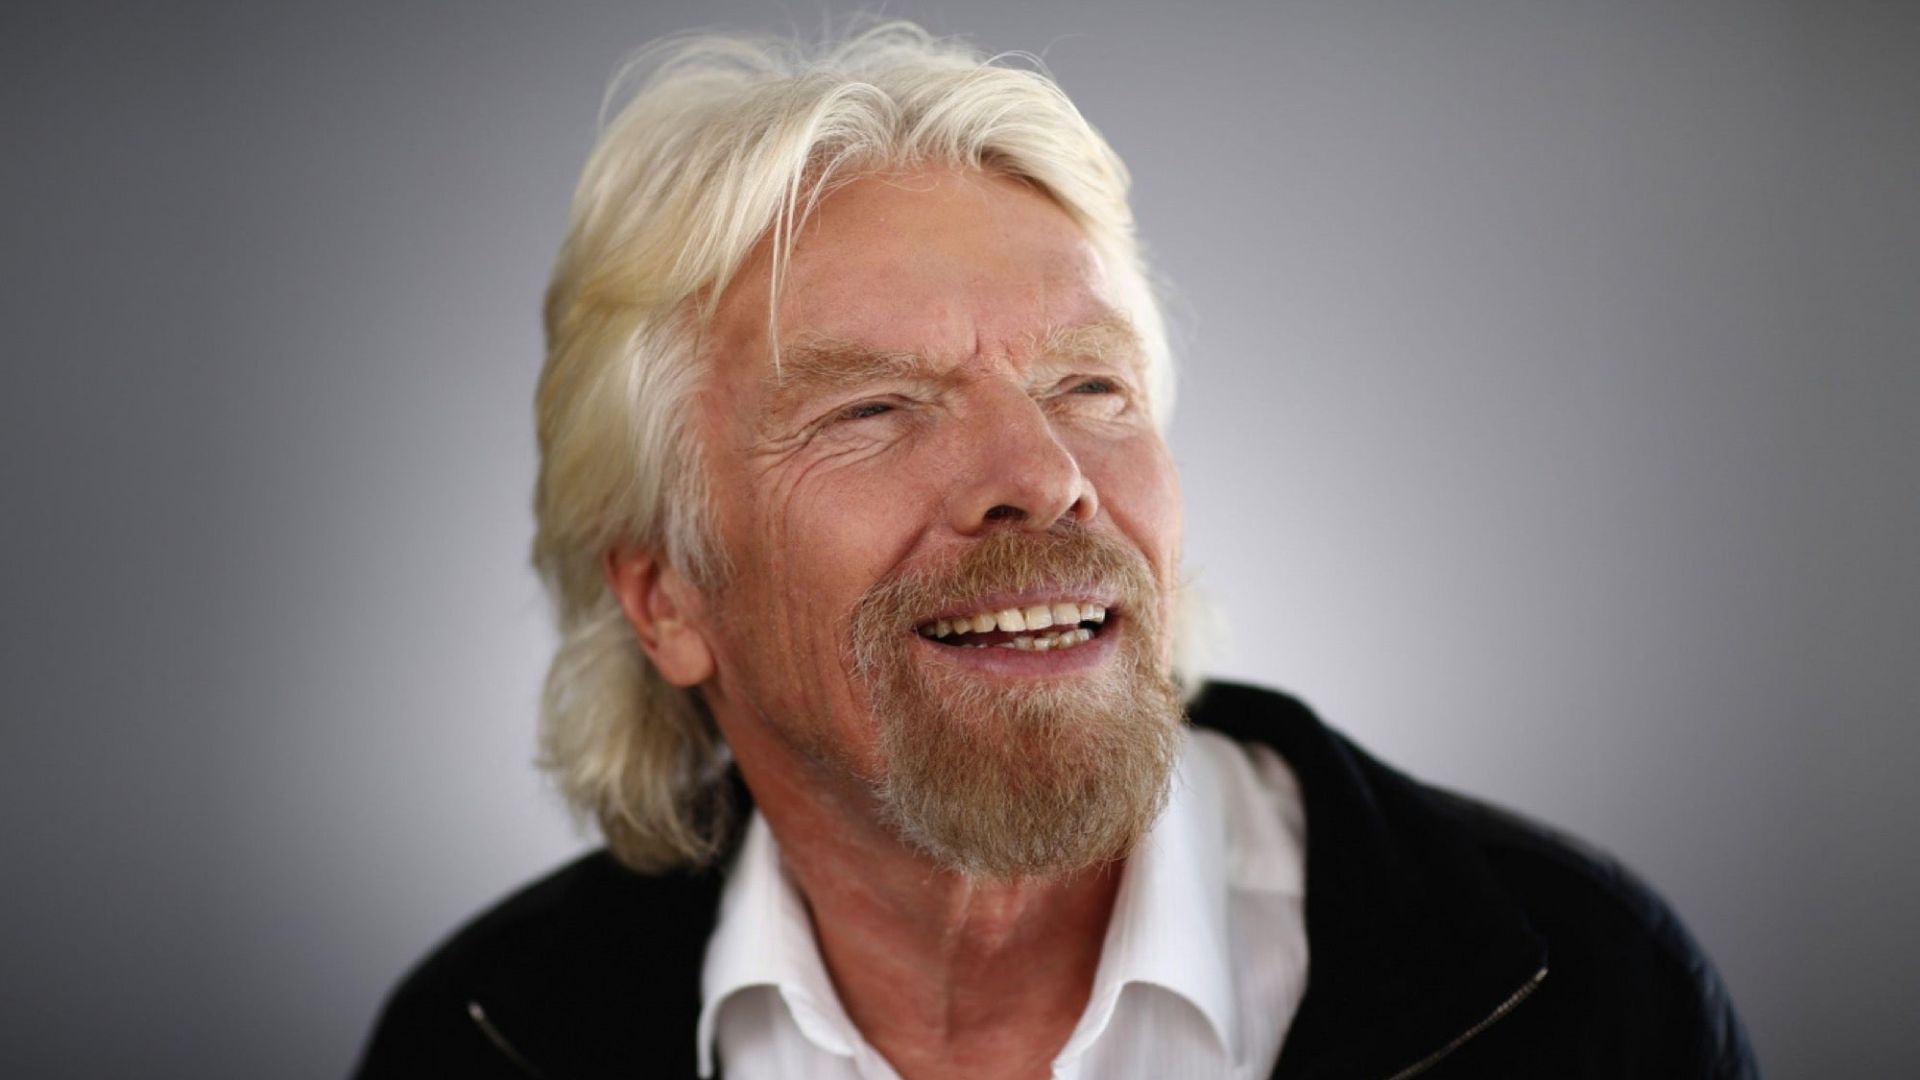 Richard Branson Smiling And Wearing Black Over A White Shirt